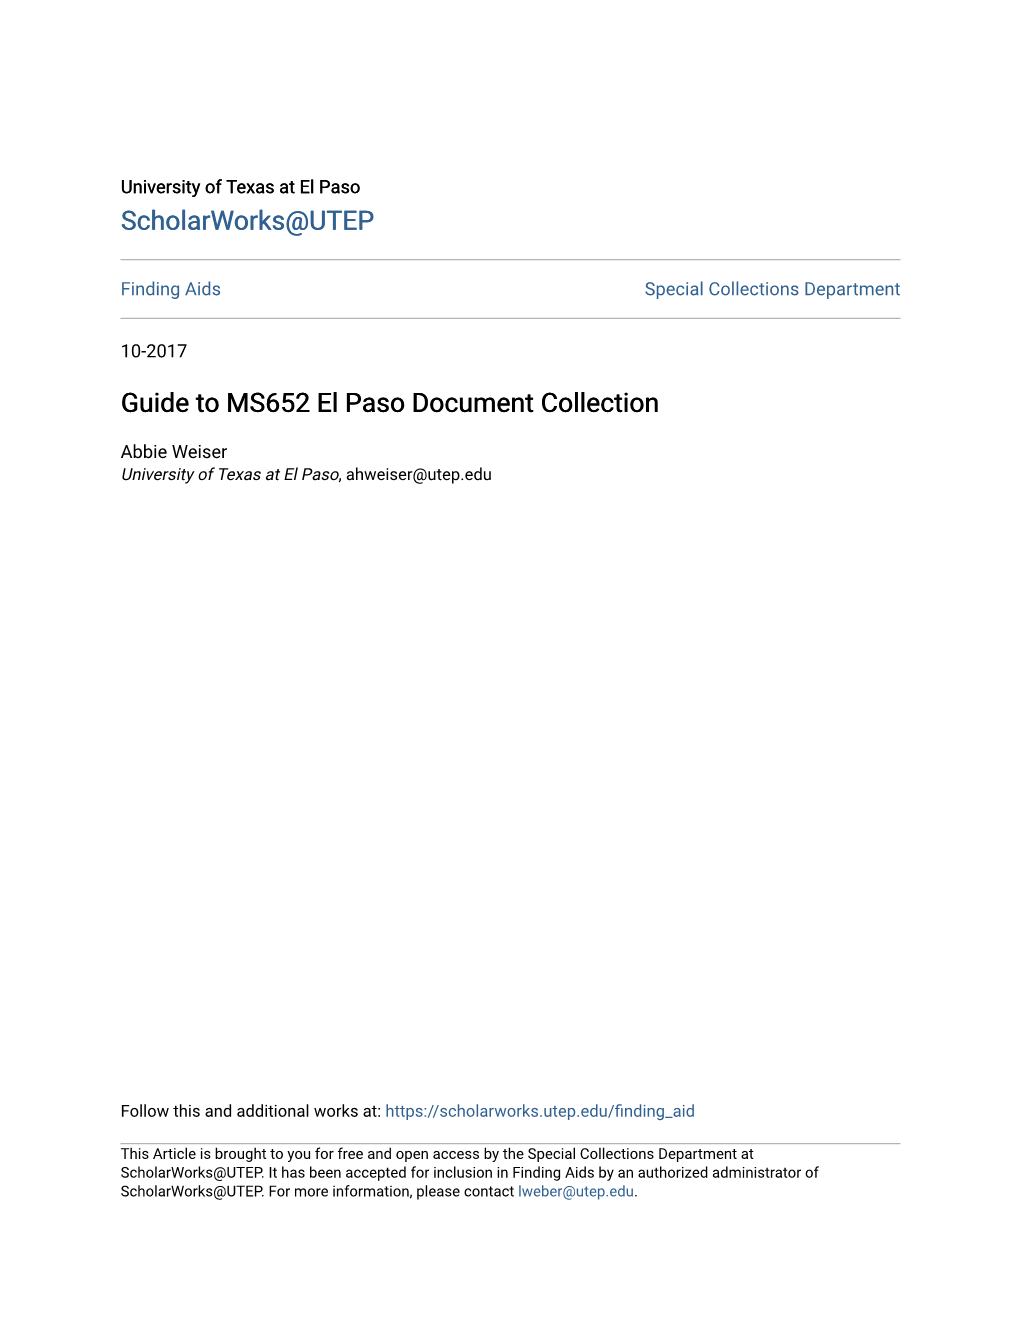 Guide to MS652 El Paso Document Collection